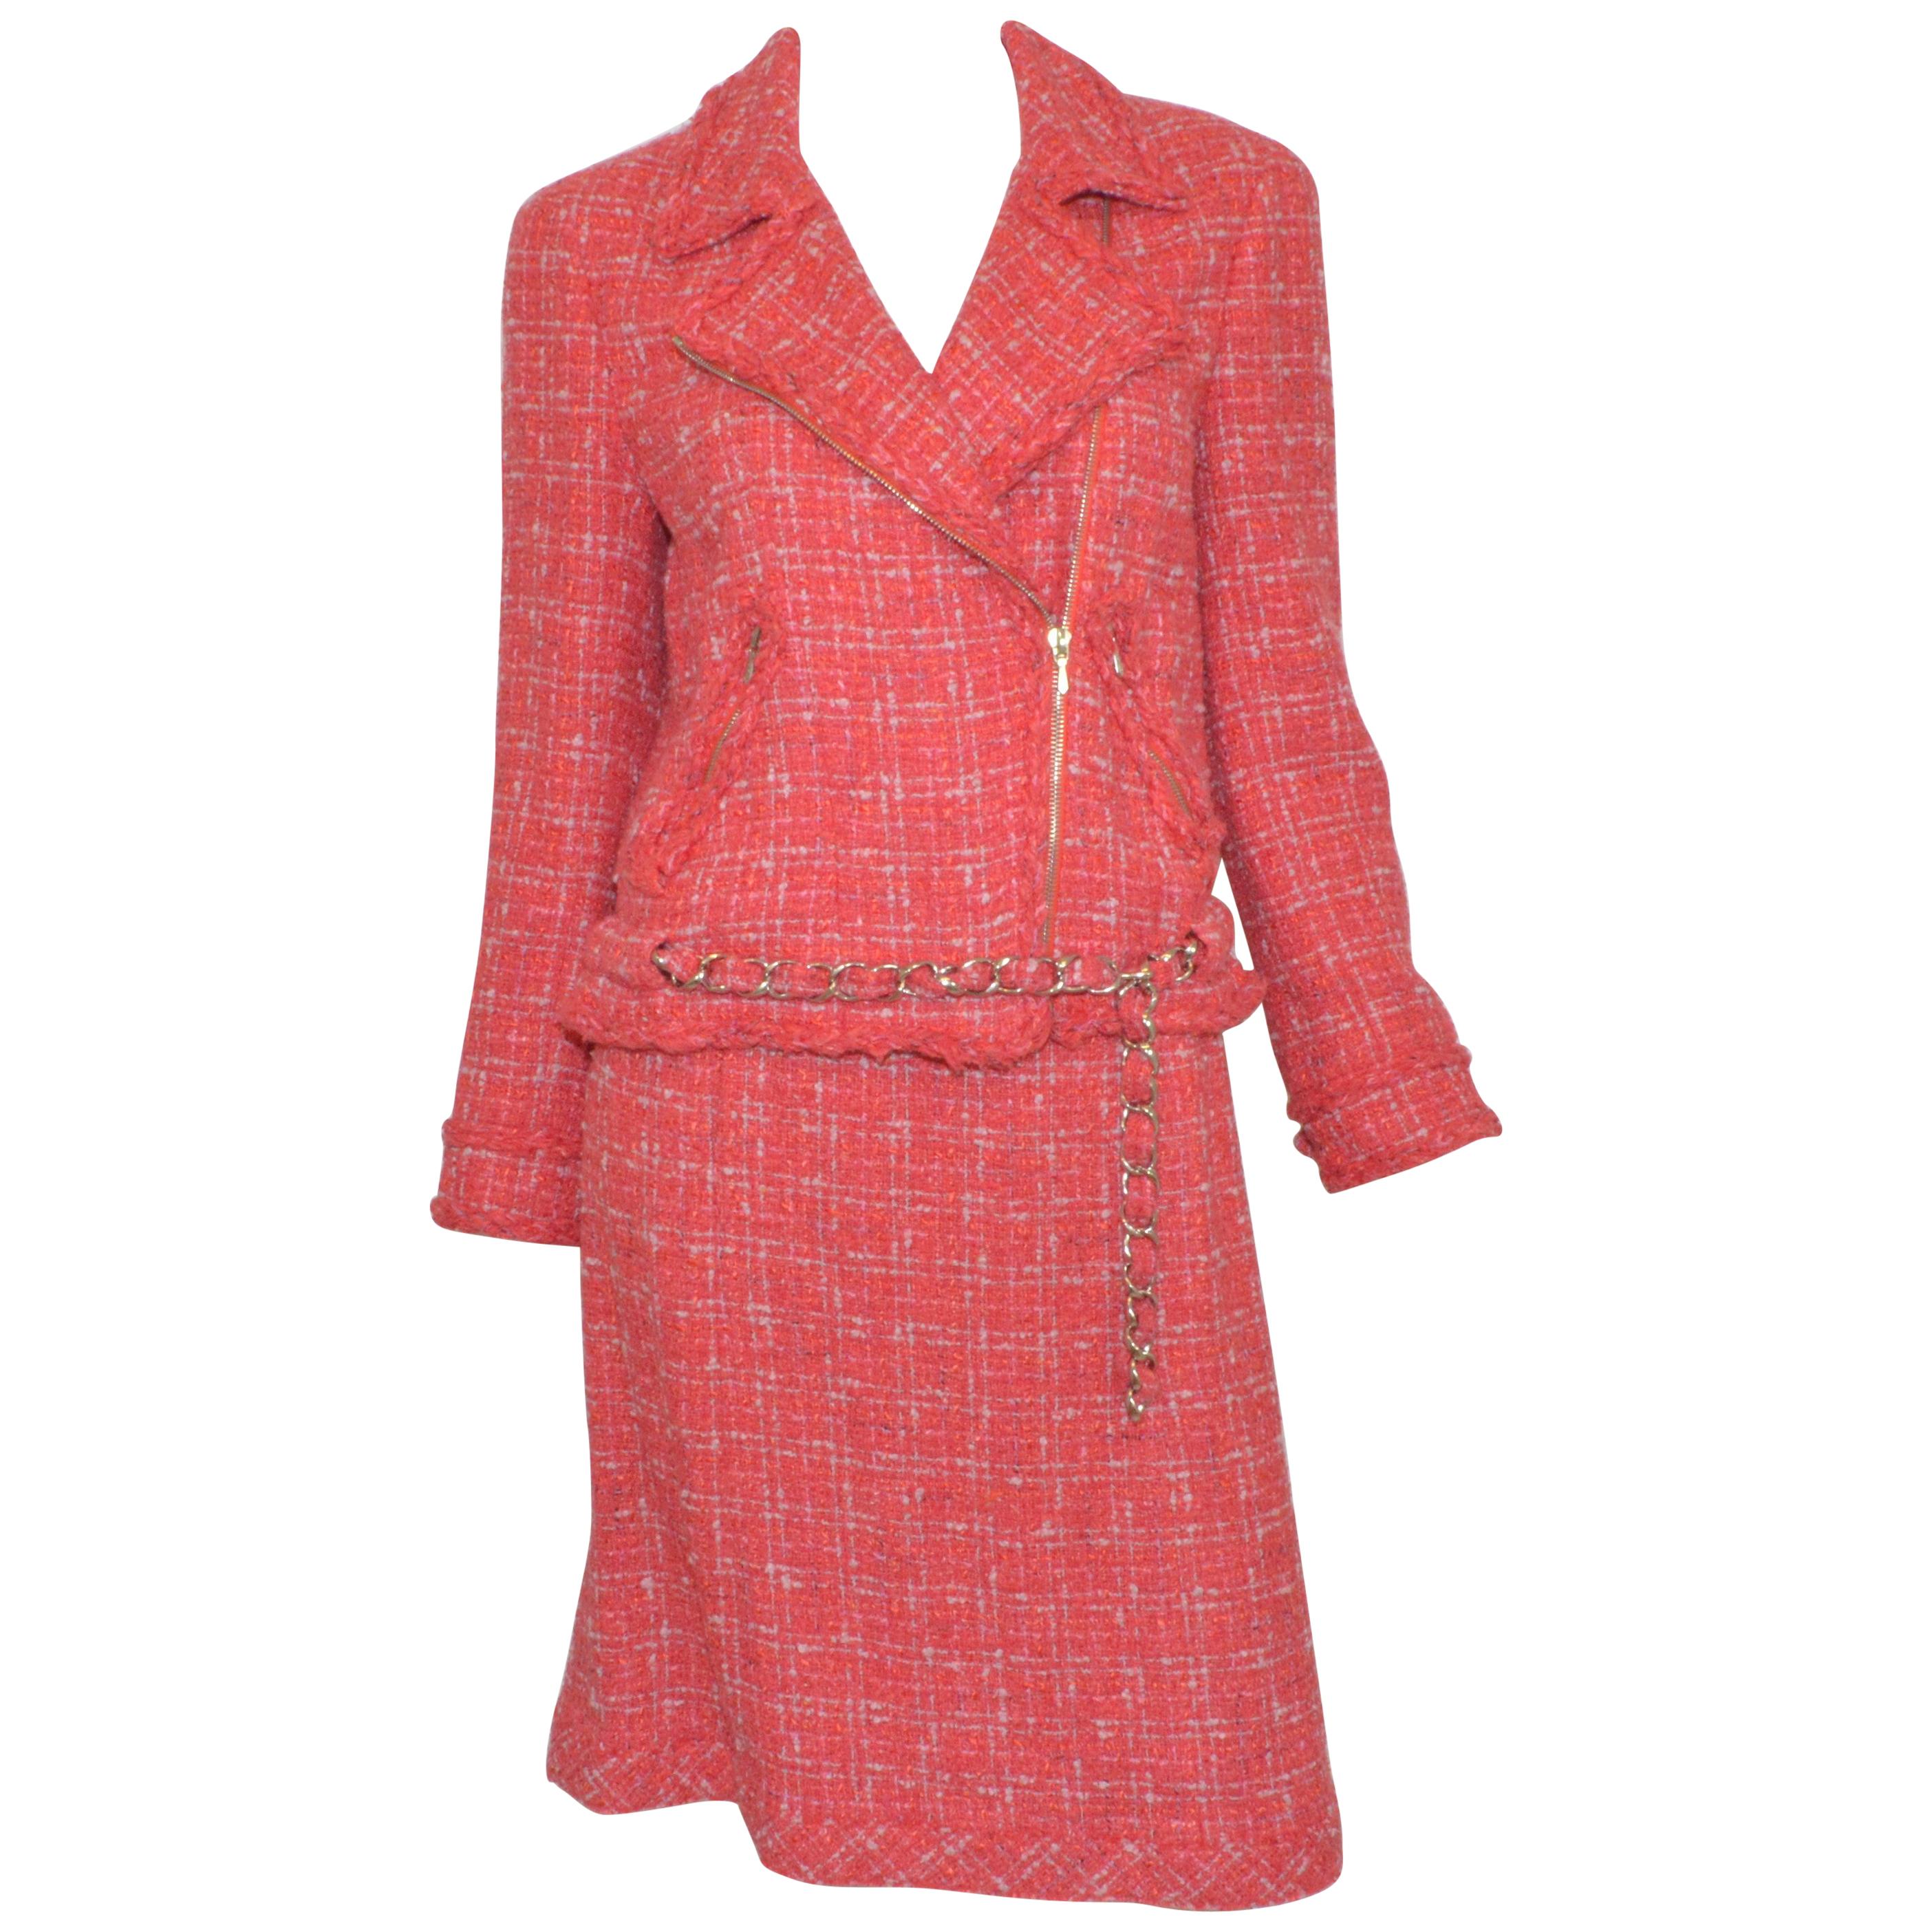 Chanel Coral Tweed Skirt with Chain Belted Jacket Set